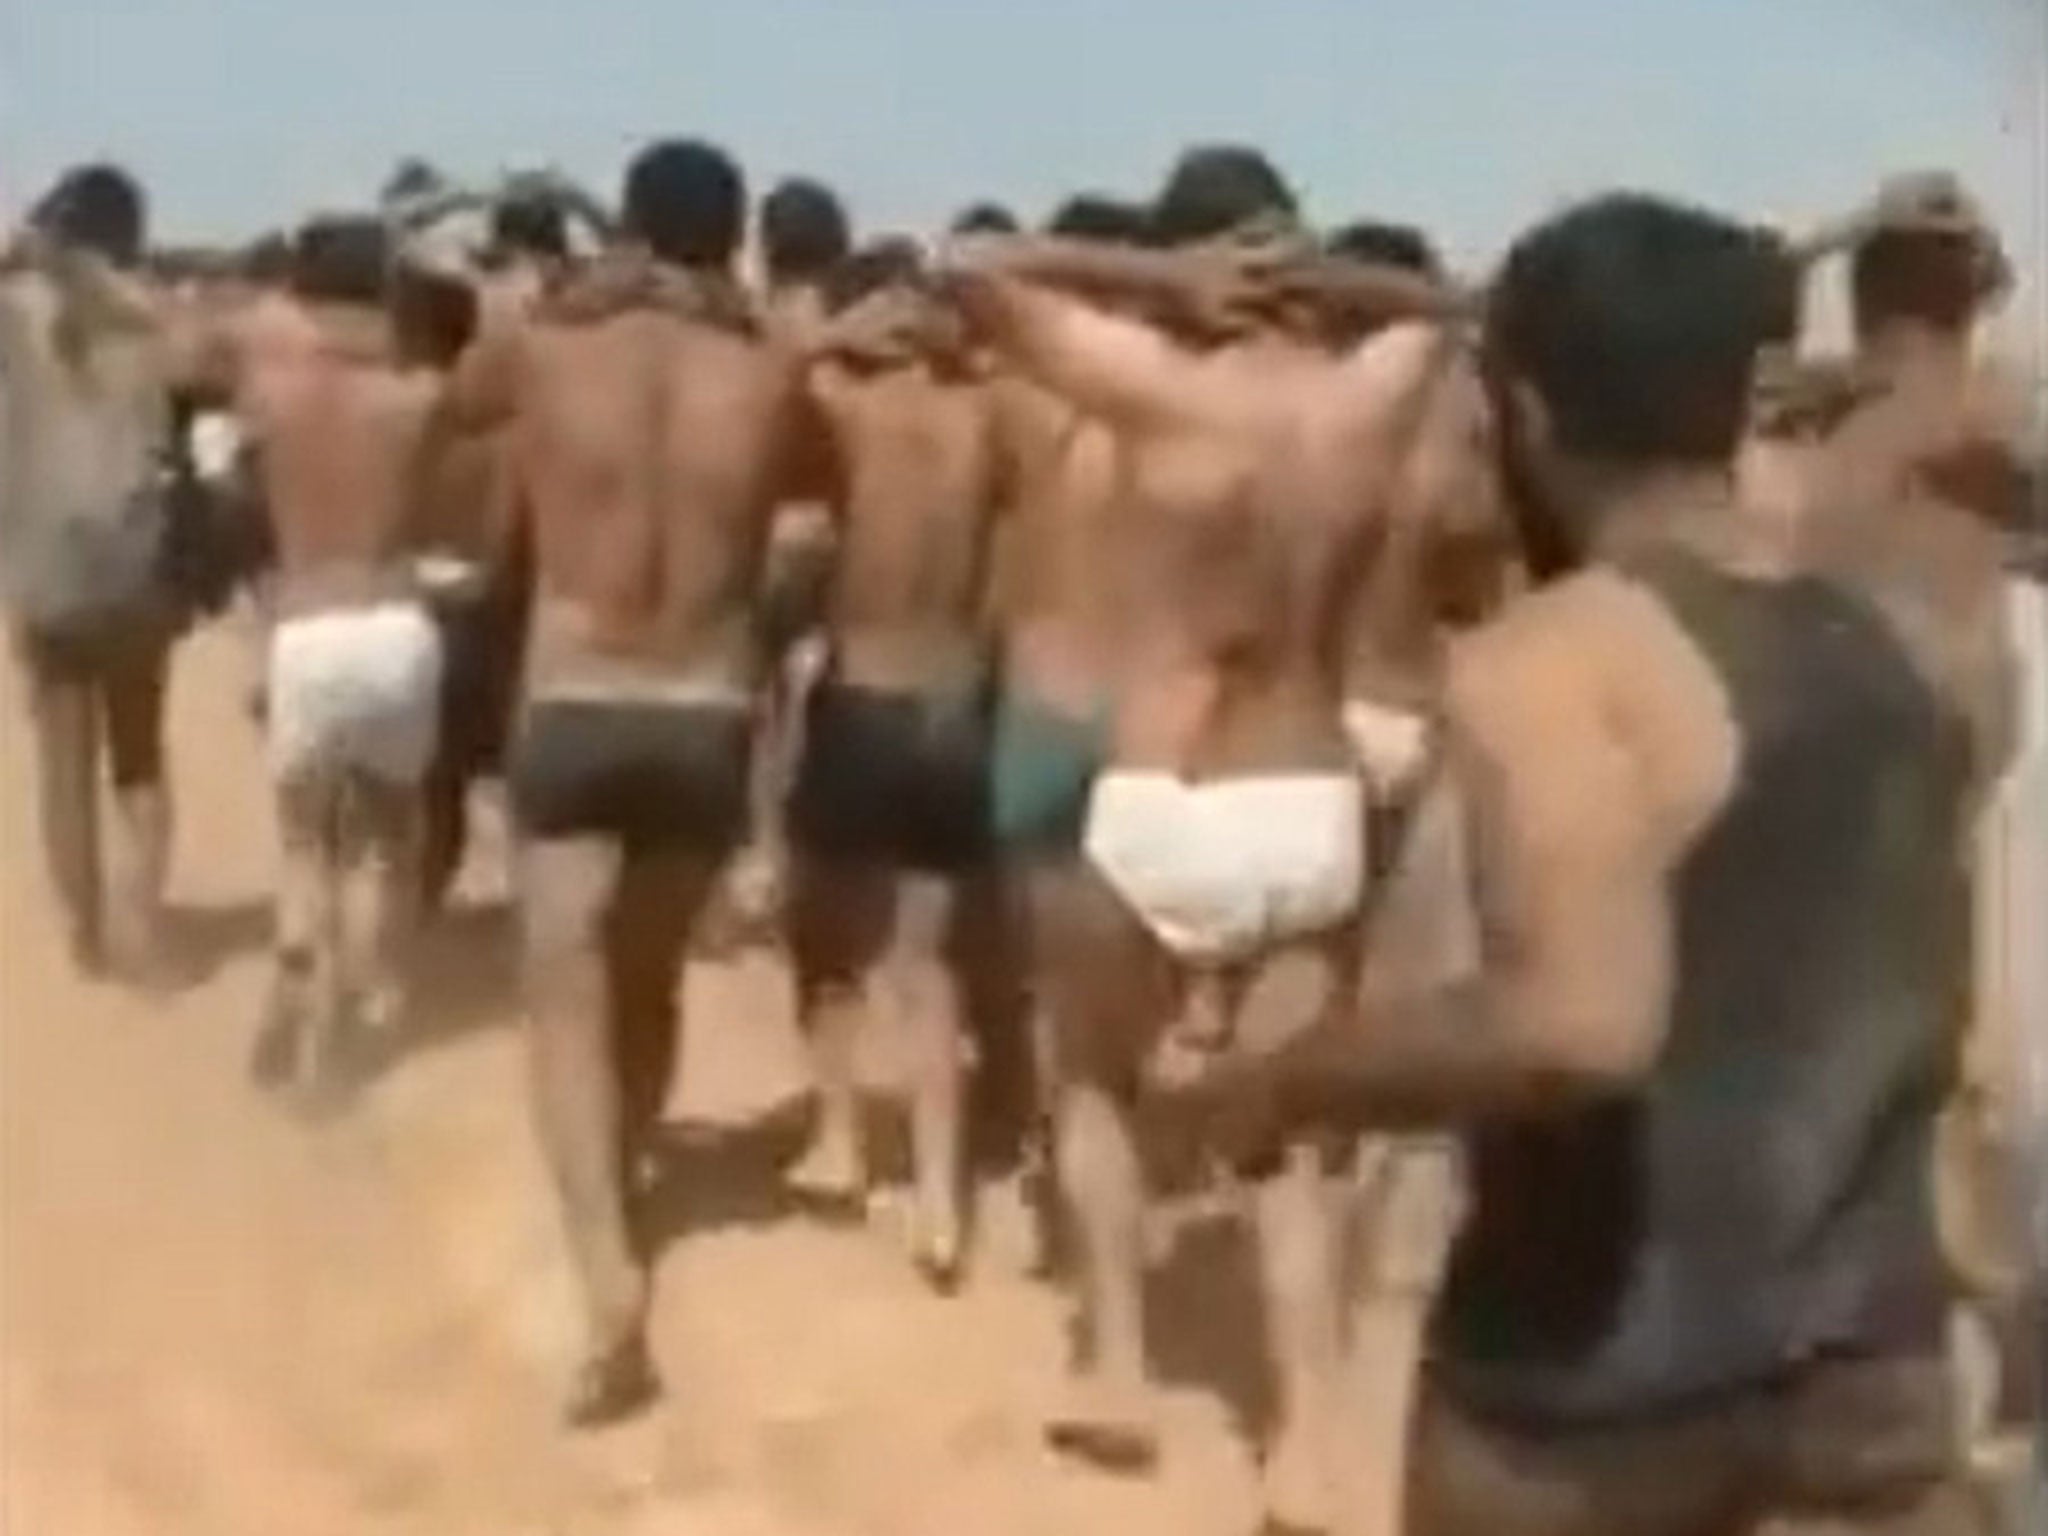 The men being marched barefoot in the desert